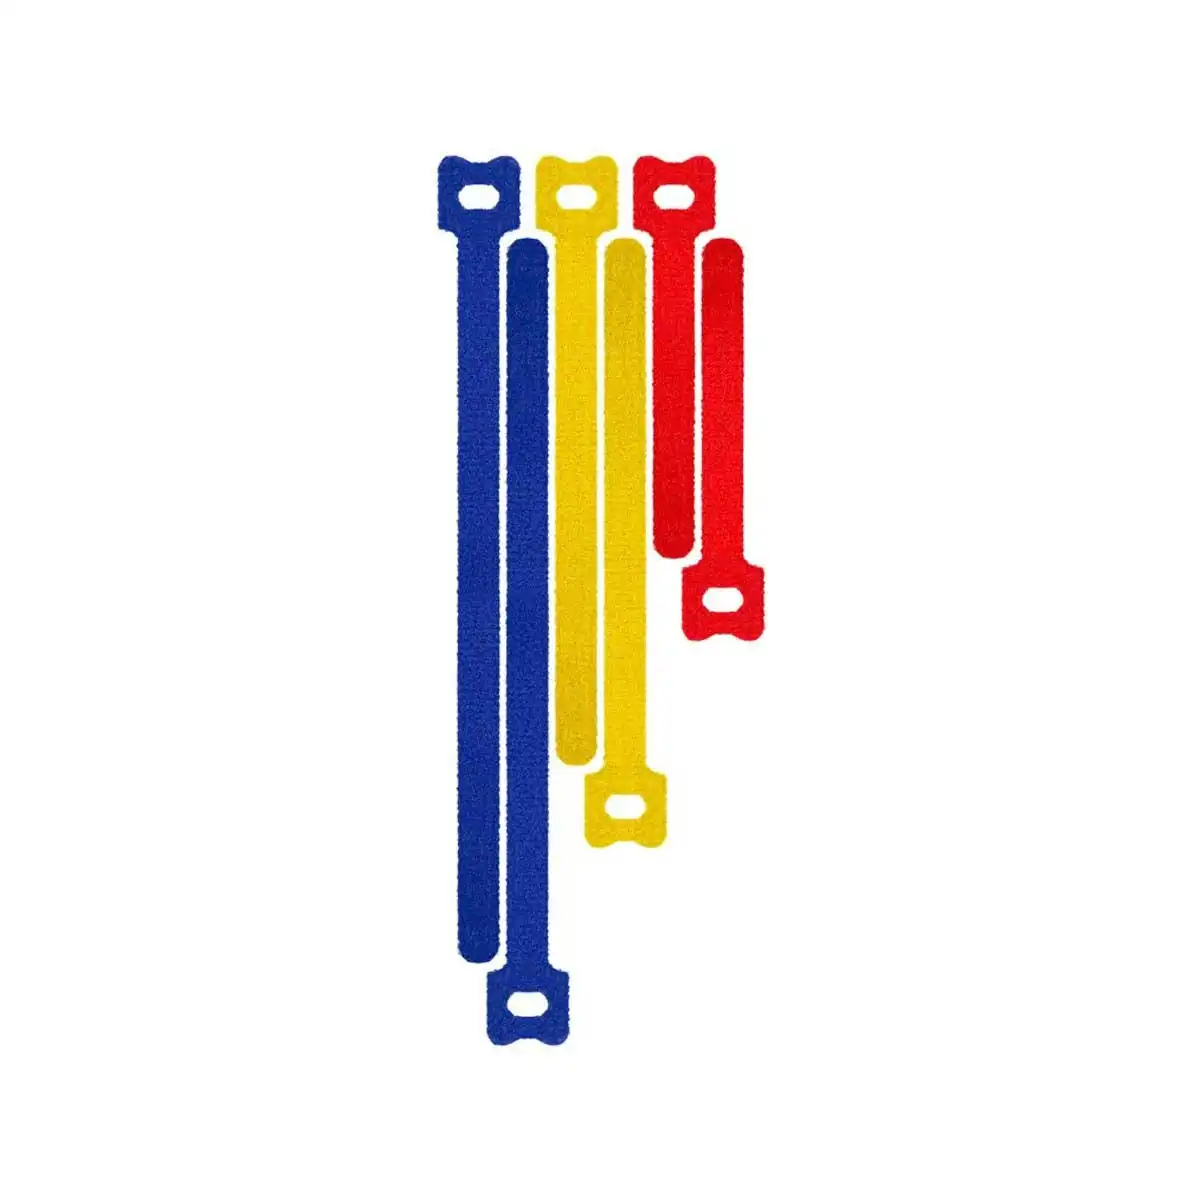 Goobay Cable Management Hook & Loop Set - Red, Yellow and Blue